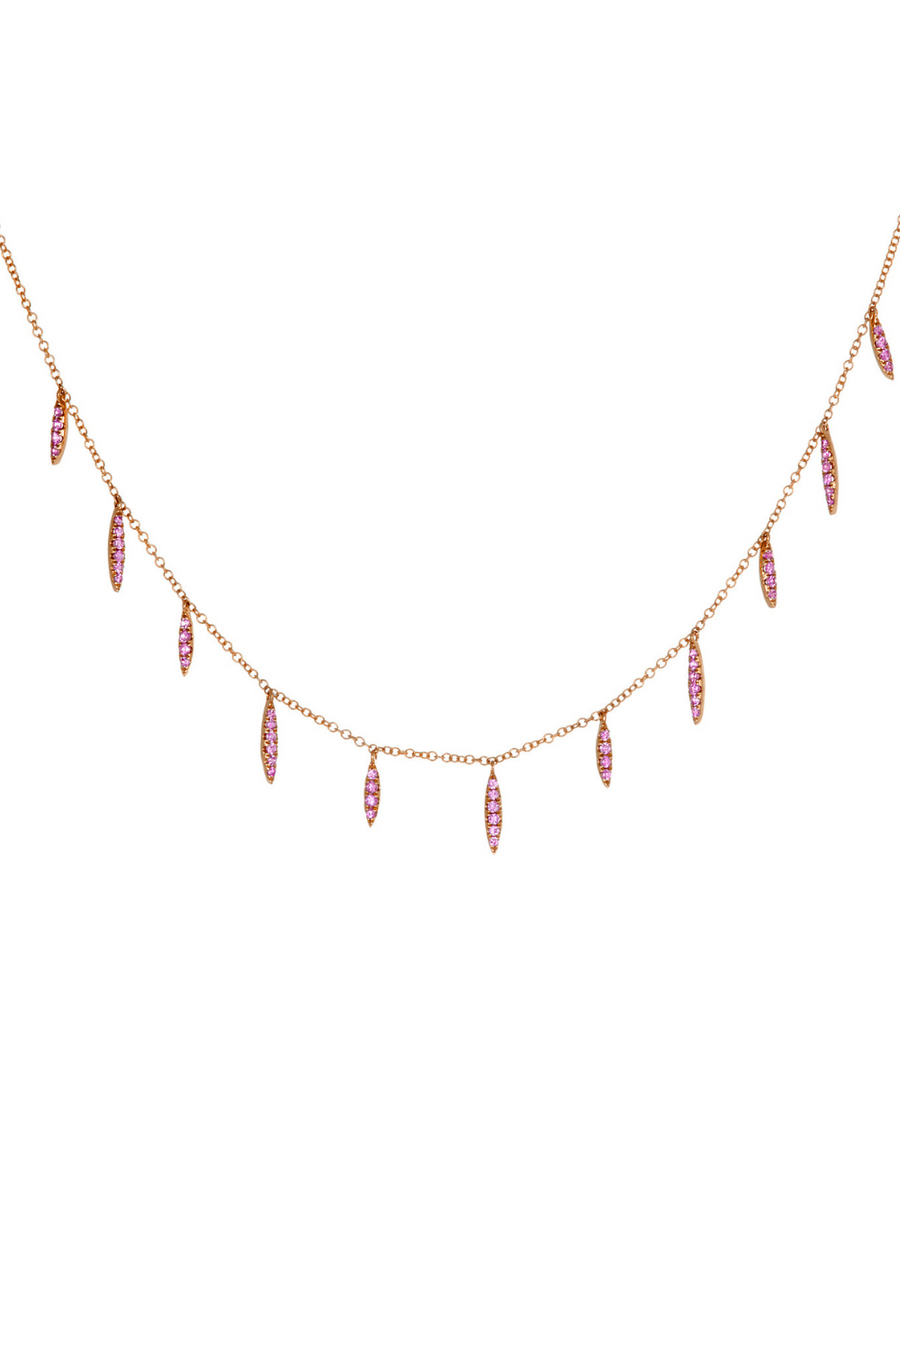 Pink Sapphire Deluxe 'Eleven Wishes' Necklace in 14k Yellow Gold